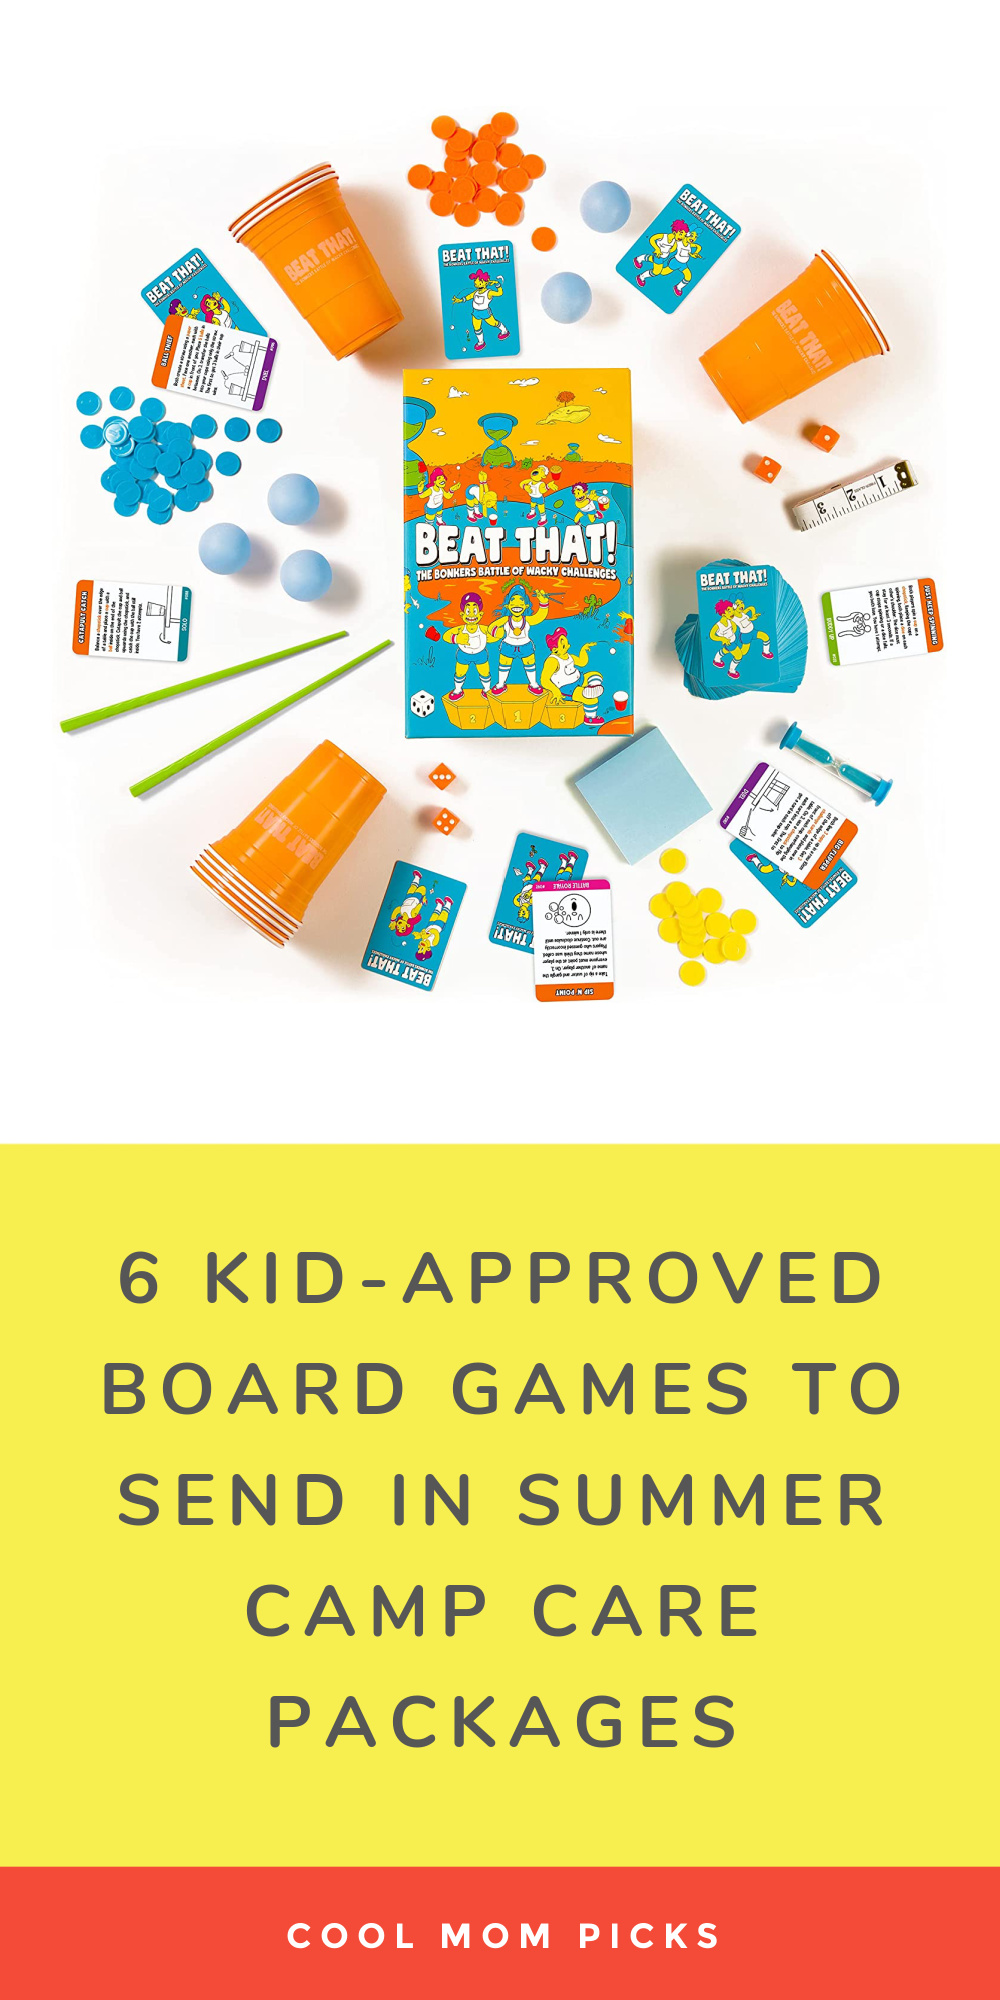 6 fun board games for summer camp care packages